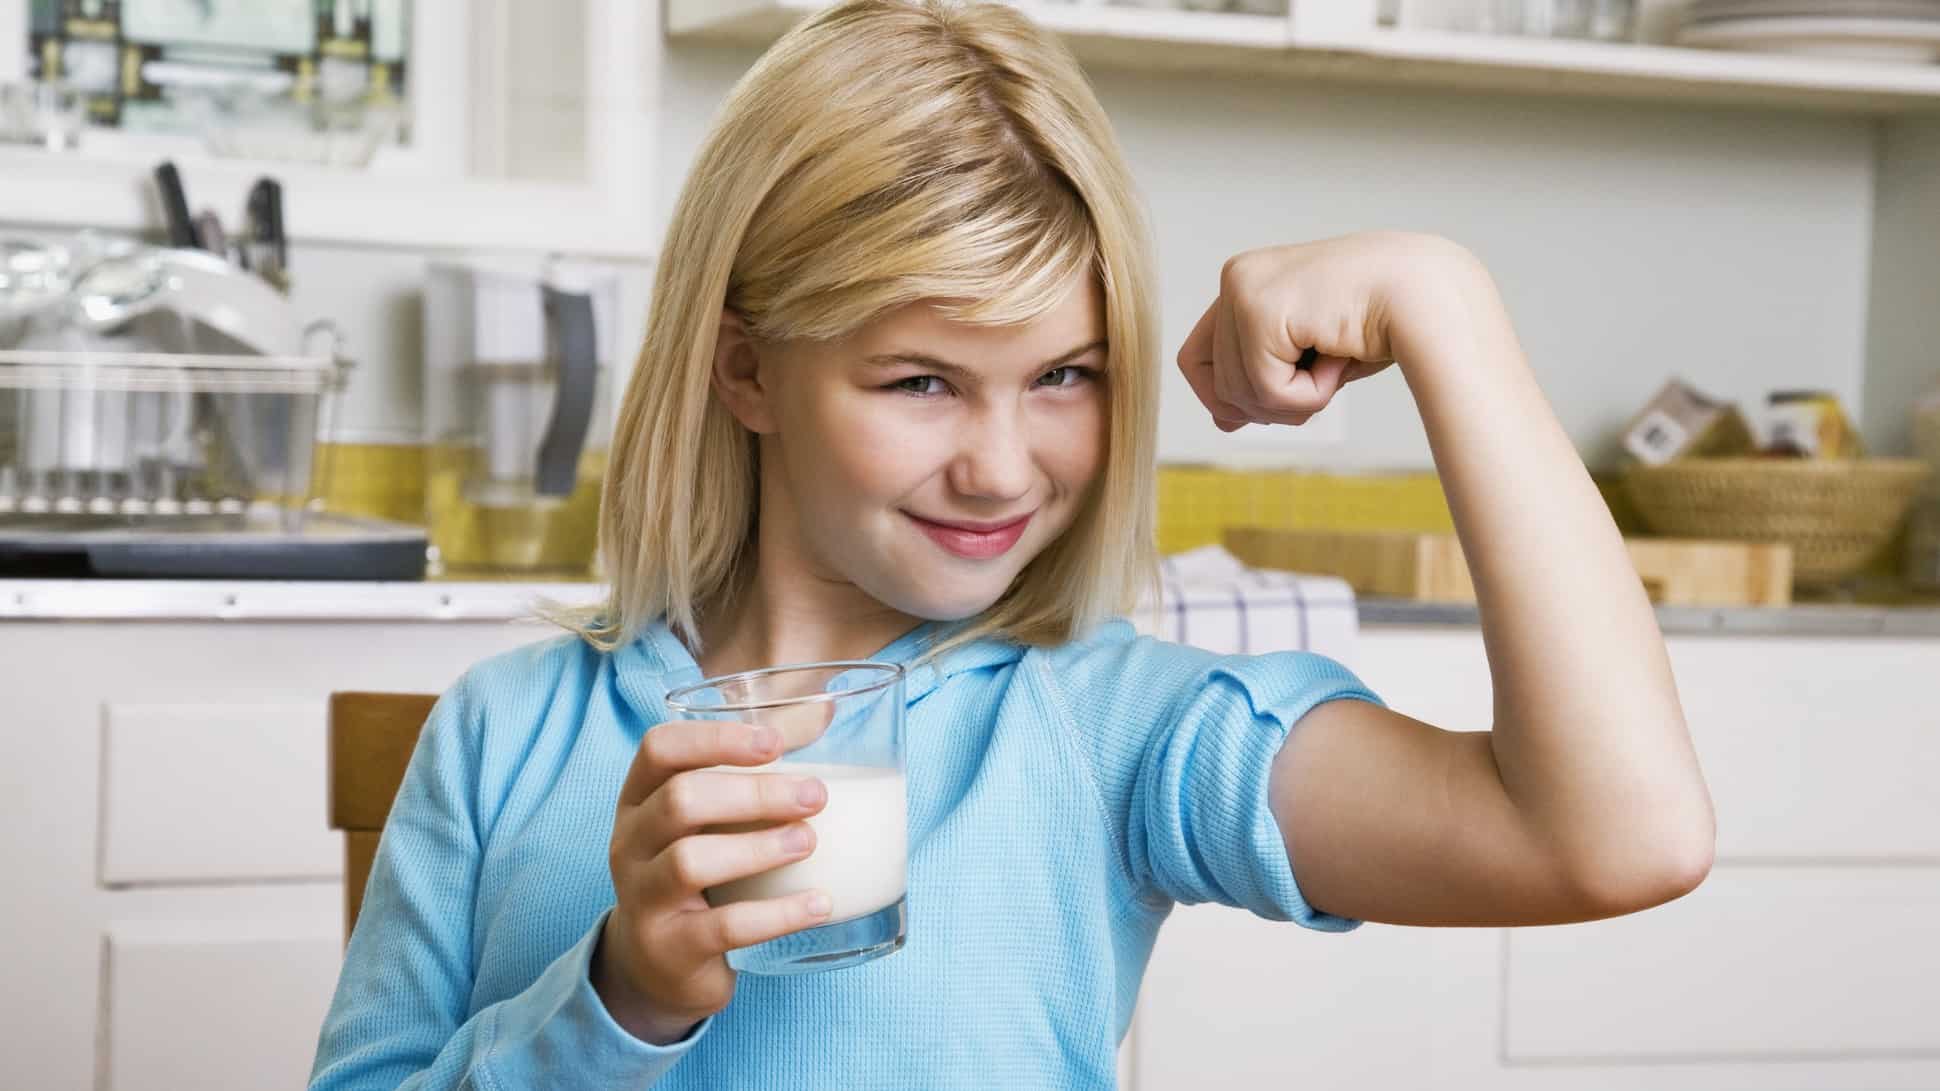 Young girl drinking milk showing off muscles